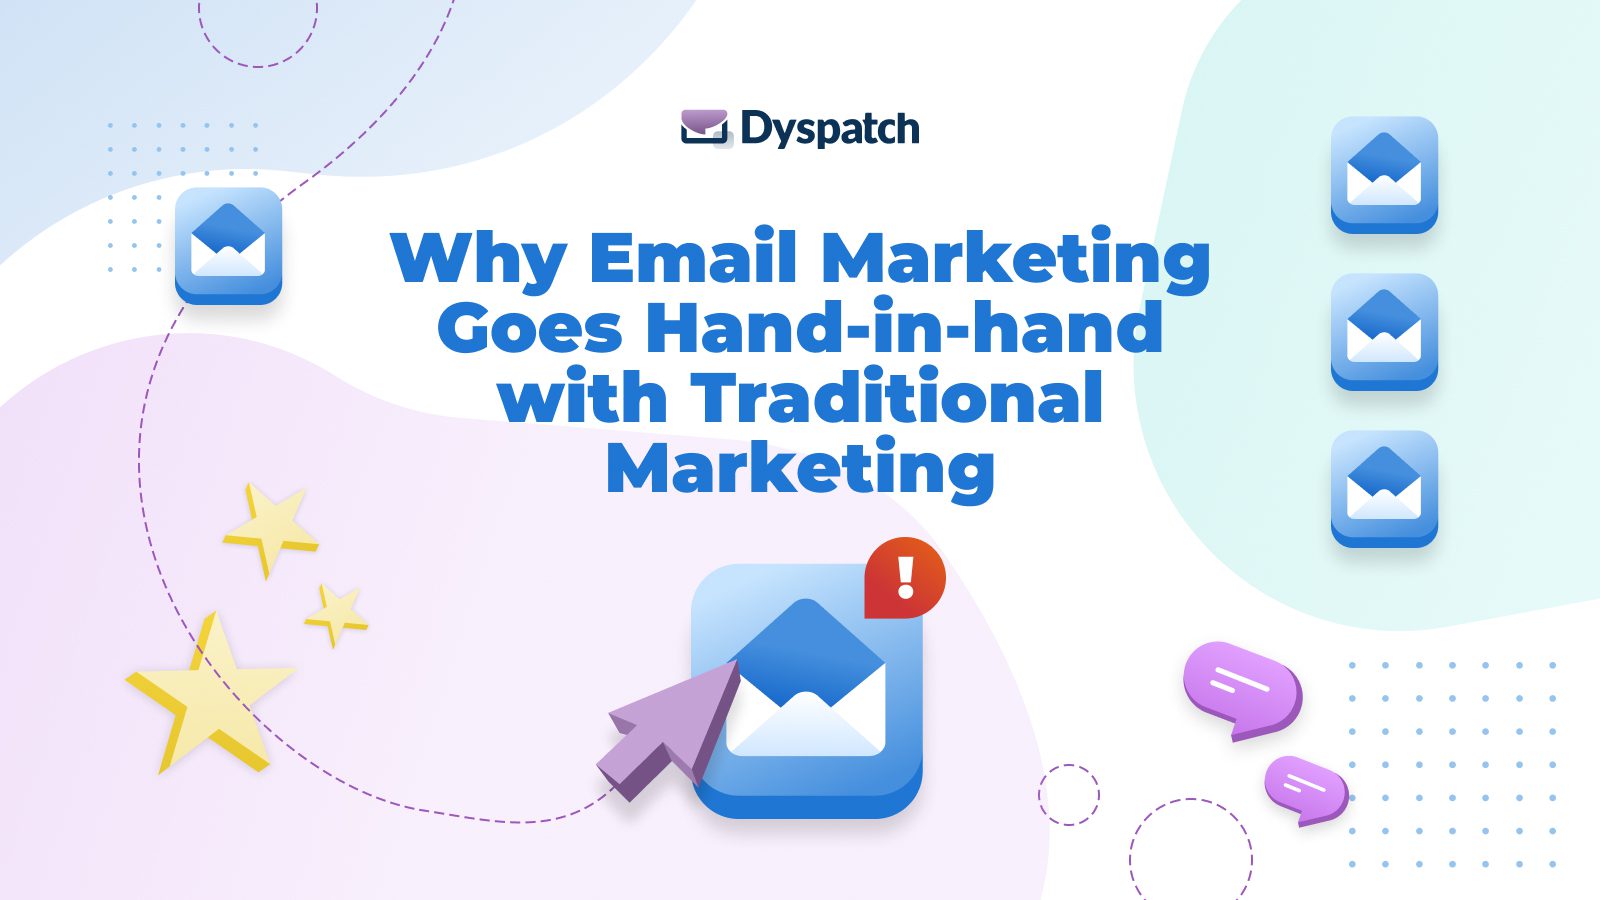 Why Email Marketing Goes Hand-in-hand with Traditional Marketing